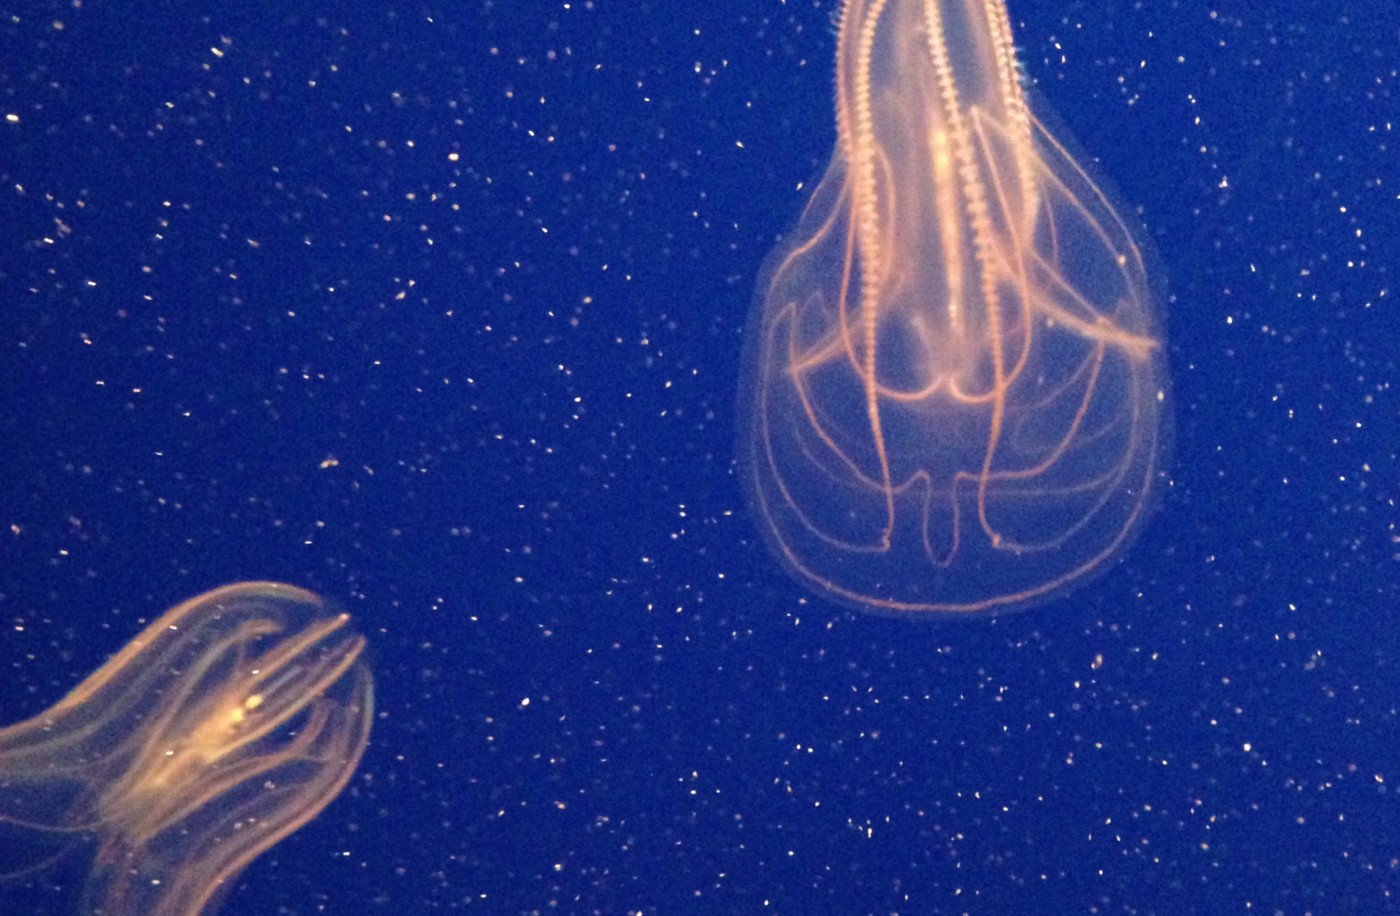 An image of jellyfish which is not related to the text of this article.